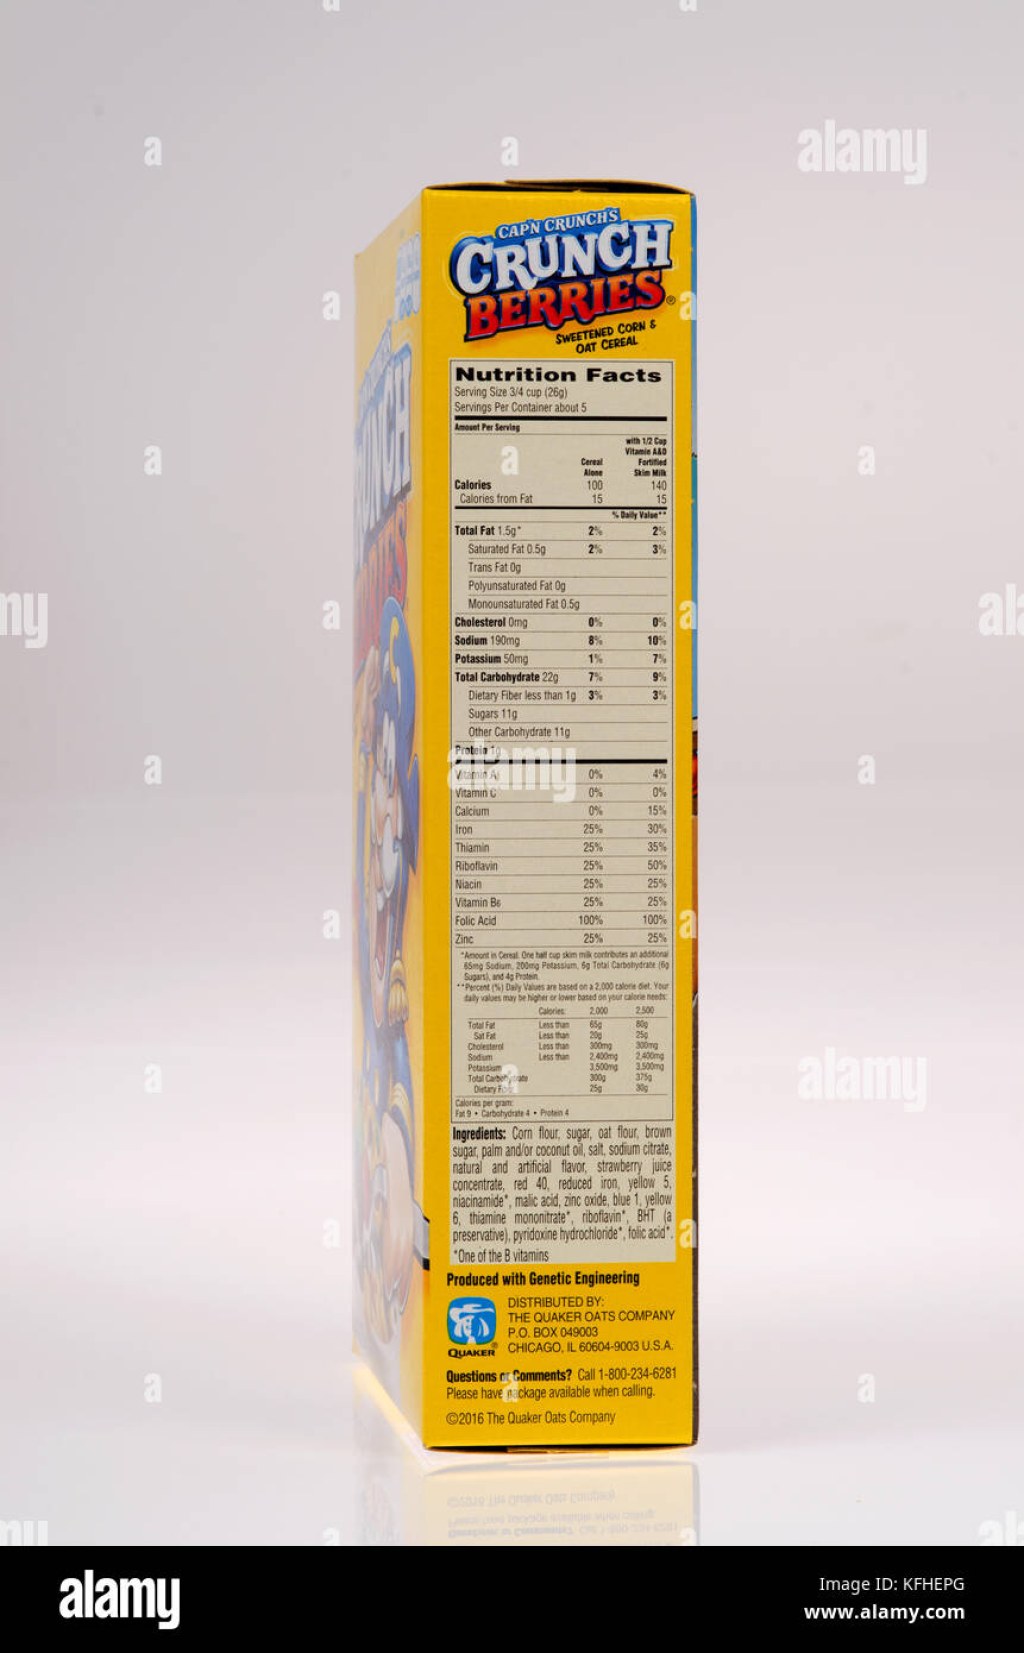 Picture of: Nutrition facts on box of Cap’n Crunch’s Crunch Berries cereal